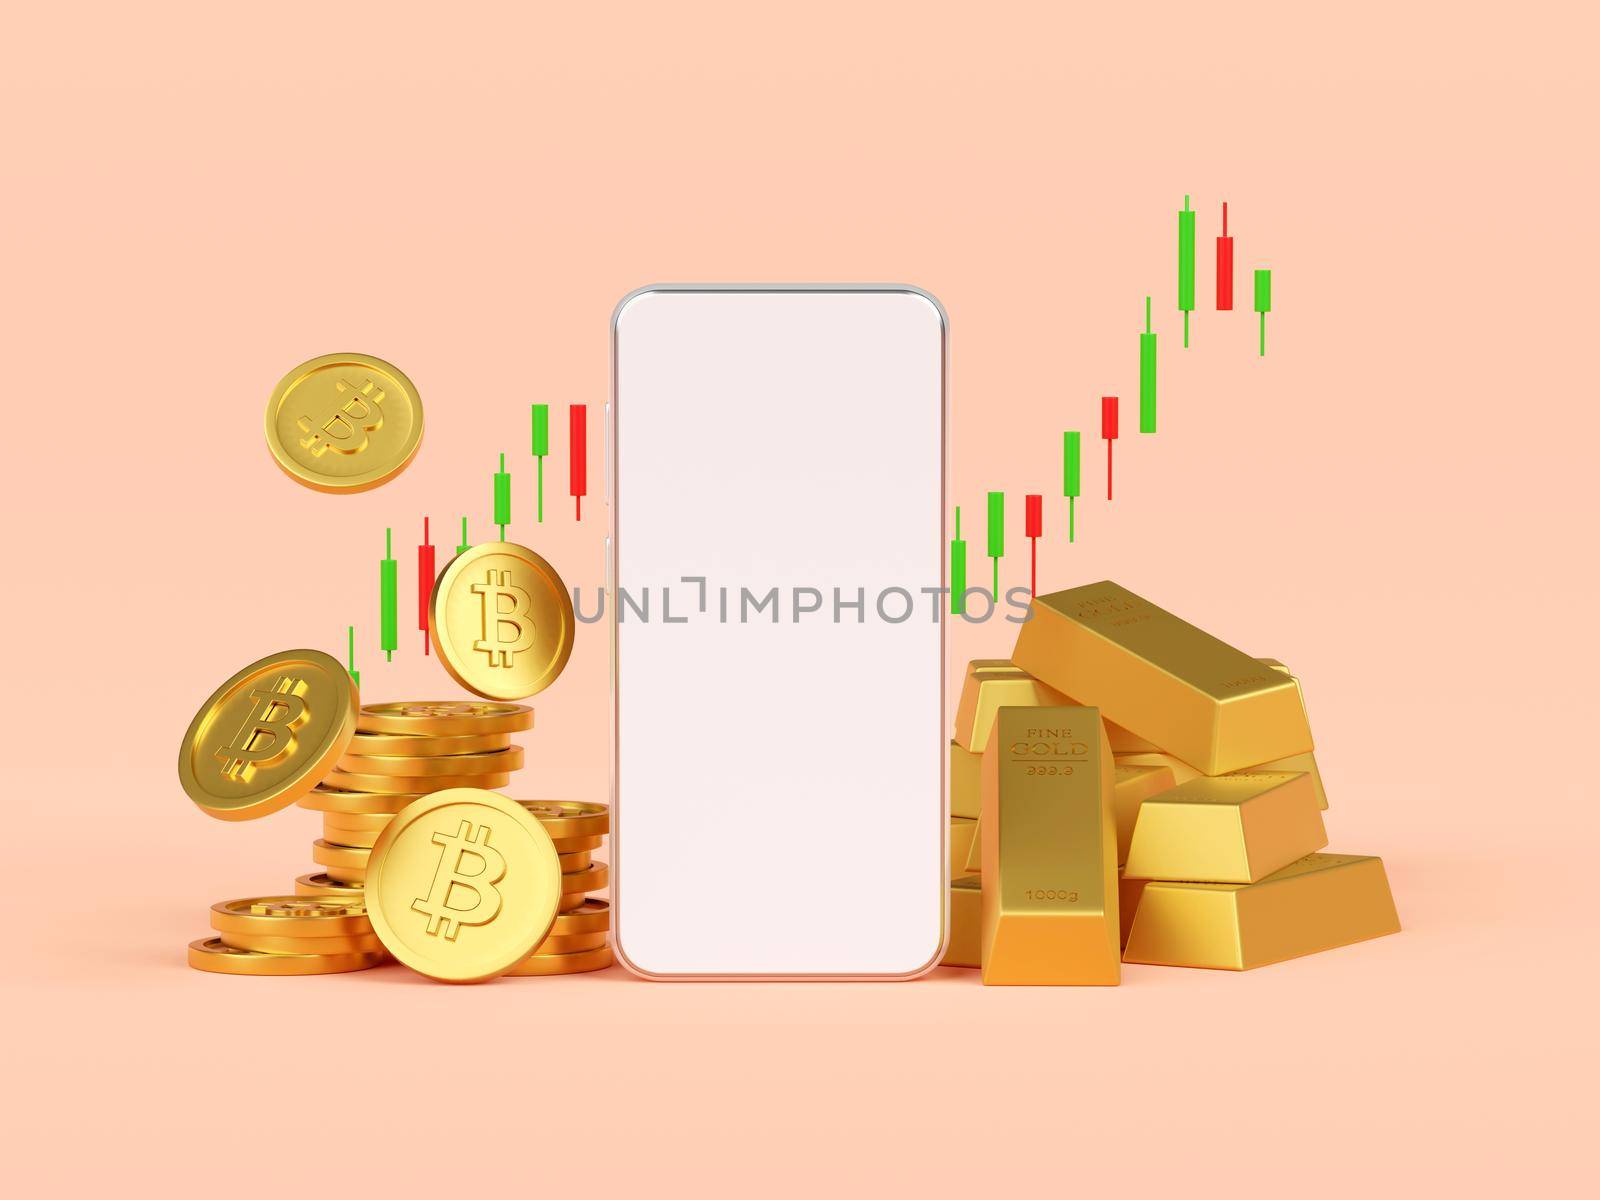 Bitcoin and gold application trading on smartphone, 3d illustration